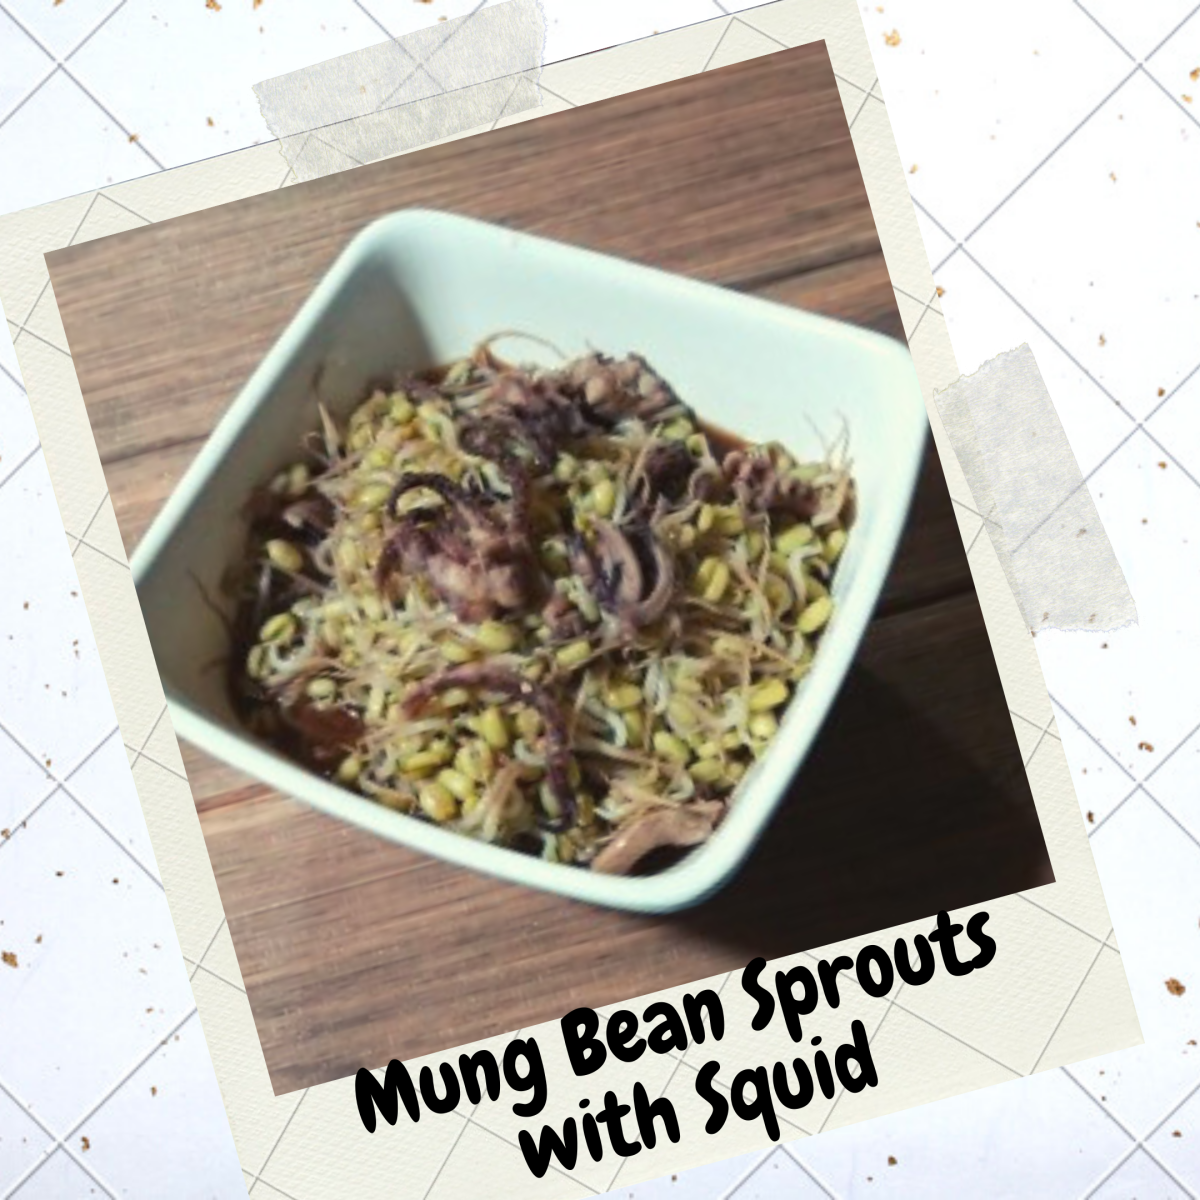 How to Cook Mung Bean Sprouts With Squid